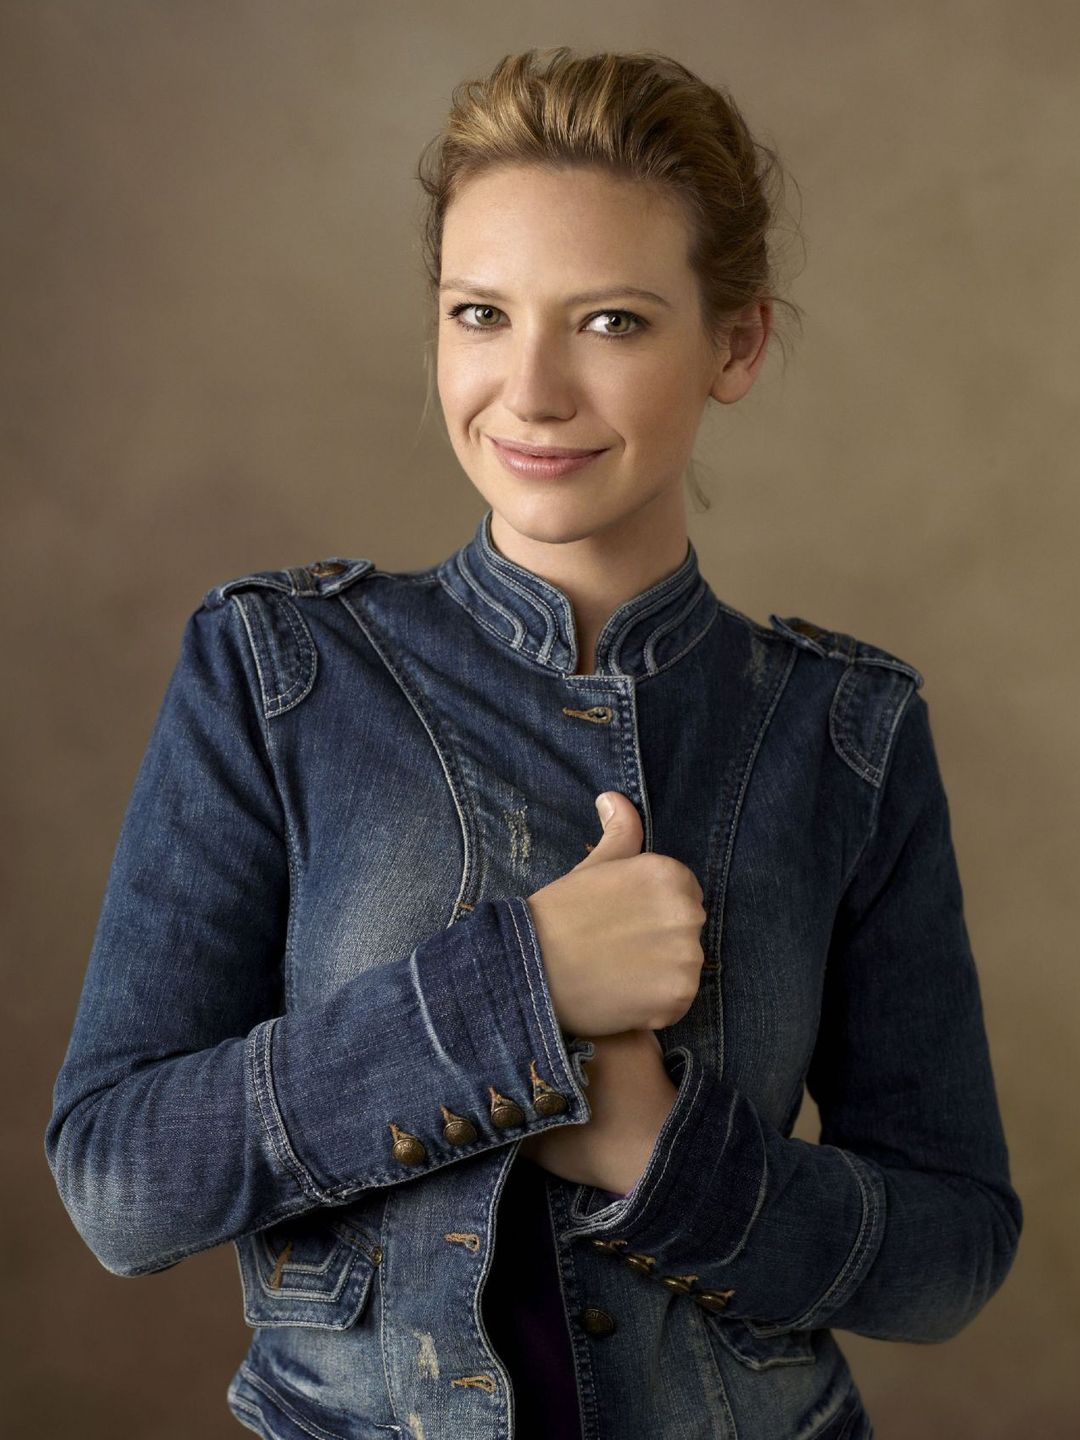 Anna Torv who is her mother